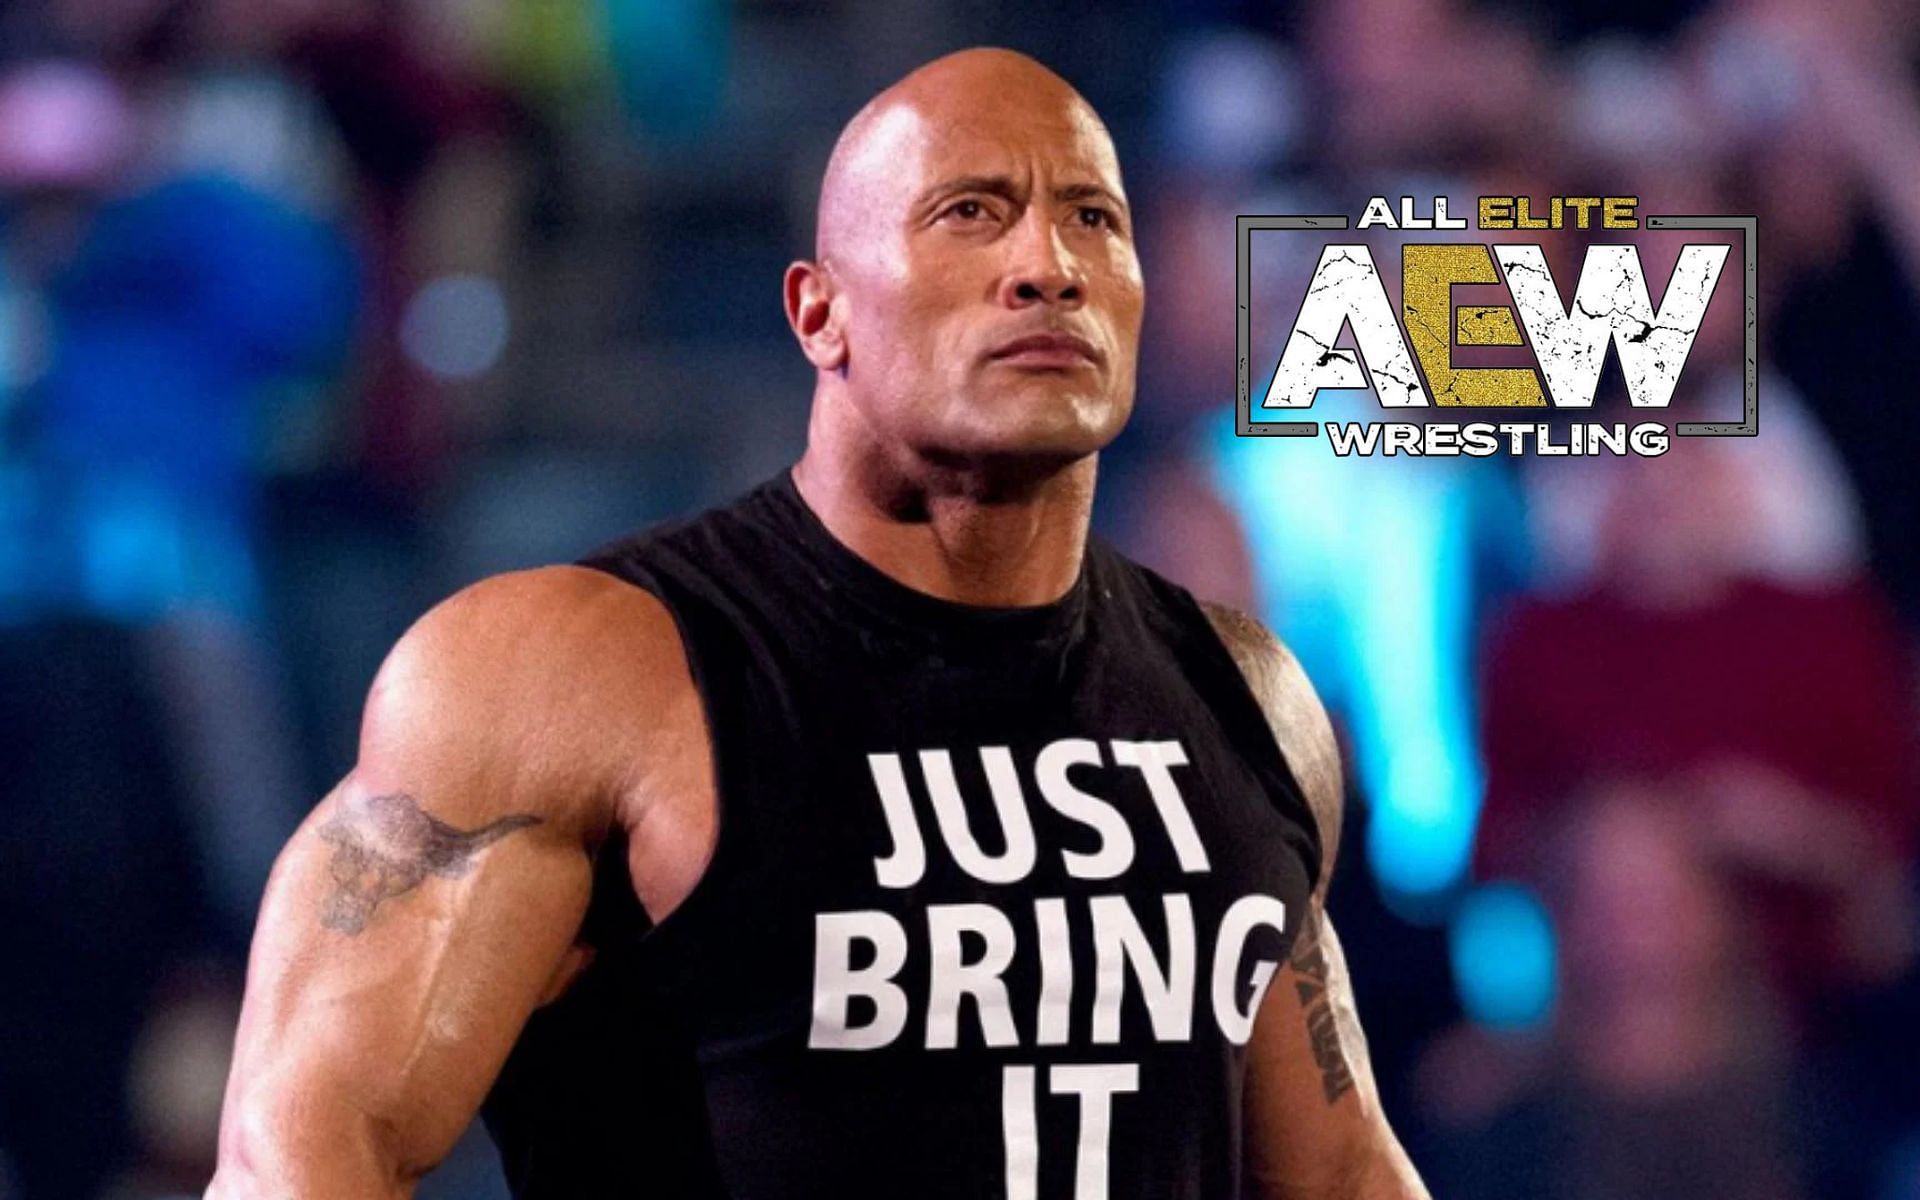 WWE legend The Rock wants to face this AEW tag-team.